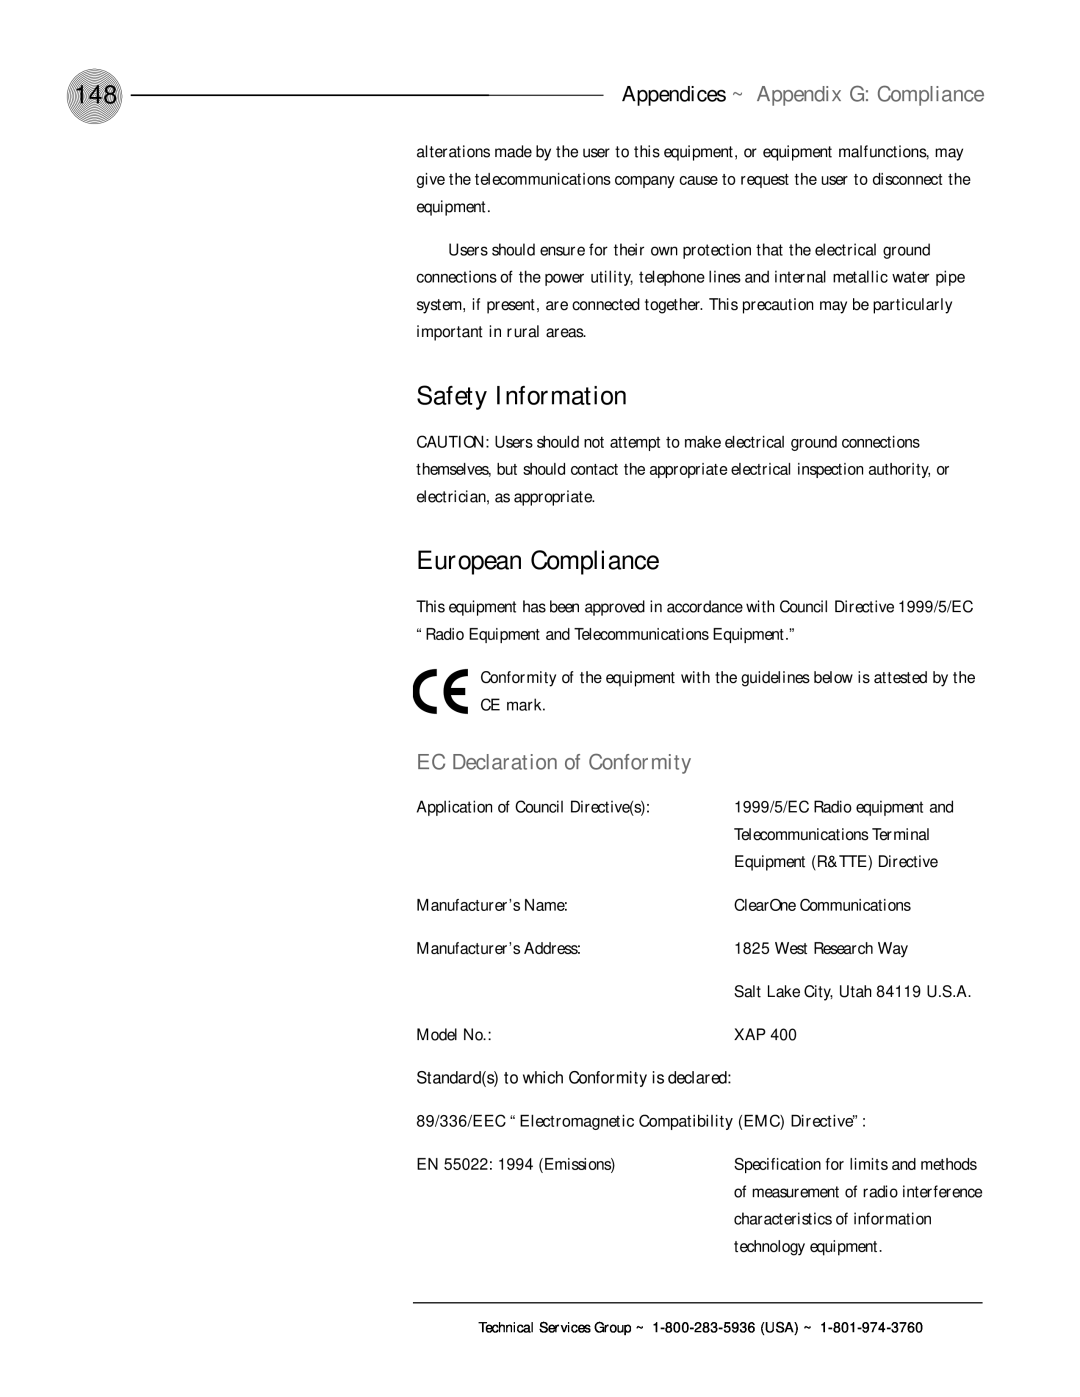 ClearOne comm XAP 400 operation manual Safety Information, European Compliance, EC Declaration of Conformity 